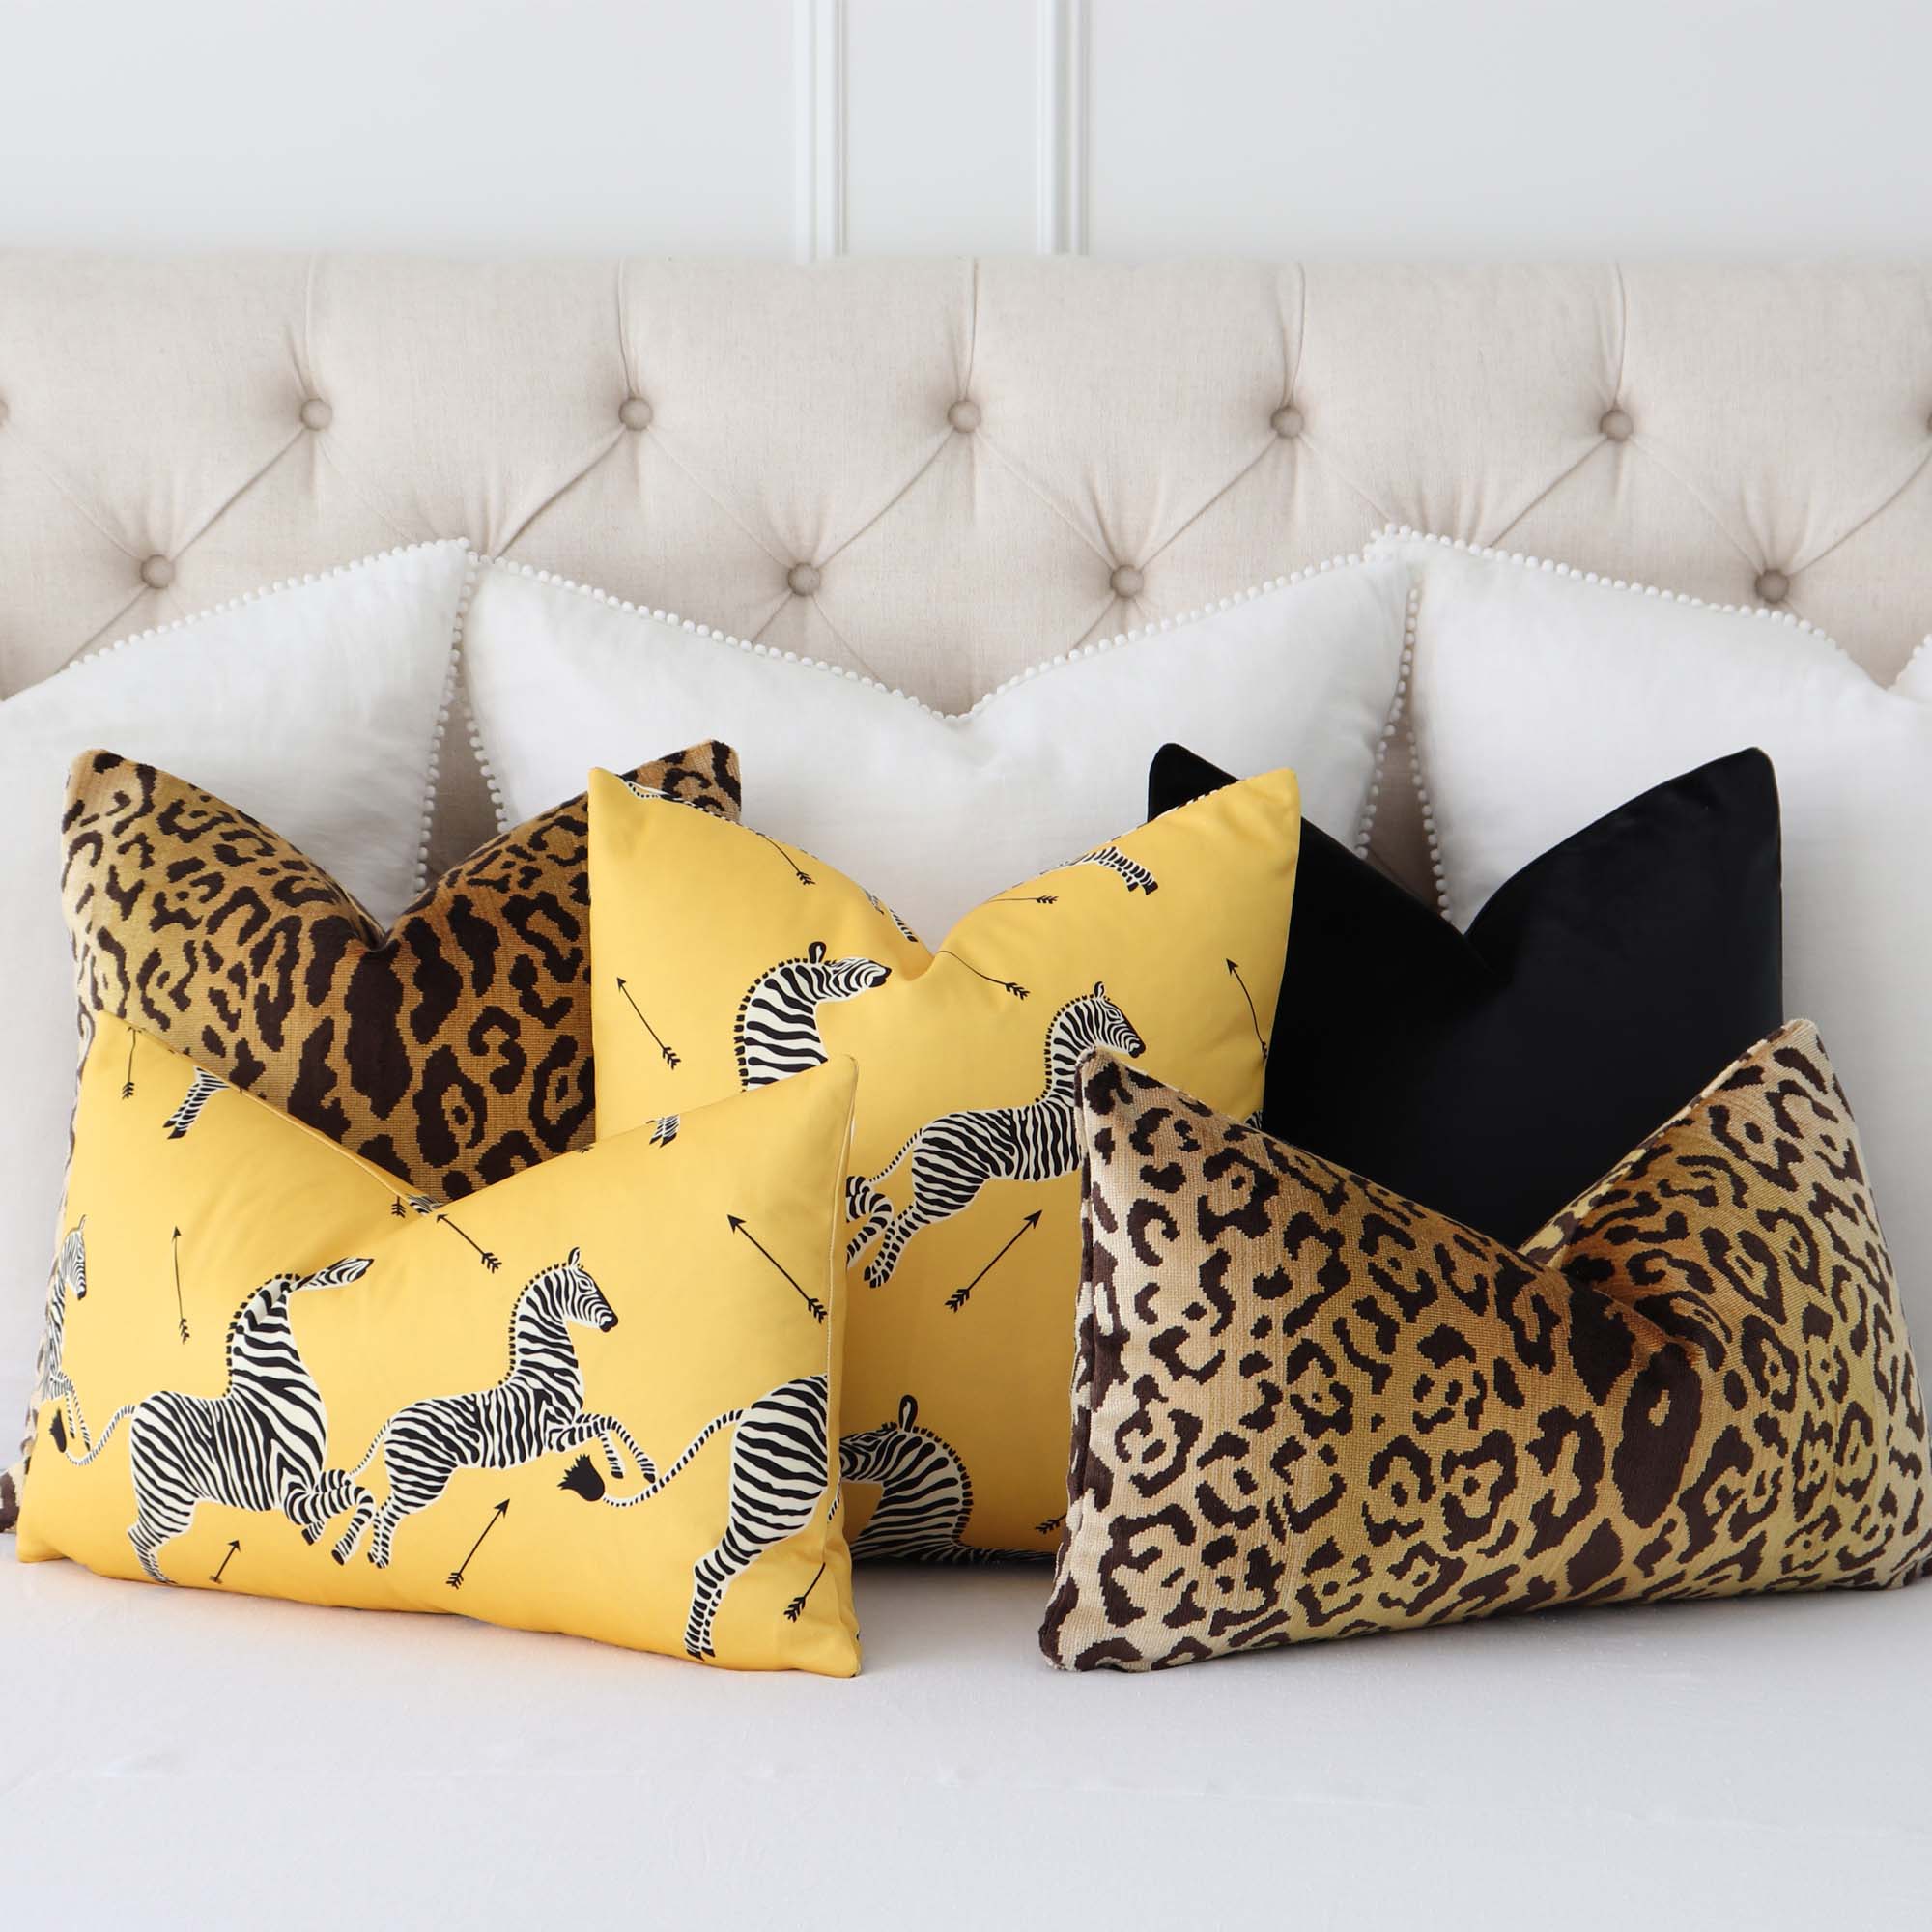 https://cdn.shopify.com/s/files/1/1116/9186/products/scalamandre-zebras-petite-yellow-SC000316641-designer-animal-print-throw-pillow-cover-with-coordinating-throw-pillows-on-bed_2000x.jpg?v=1675910125